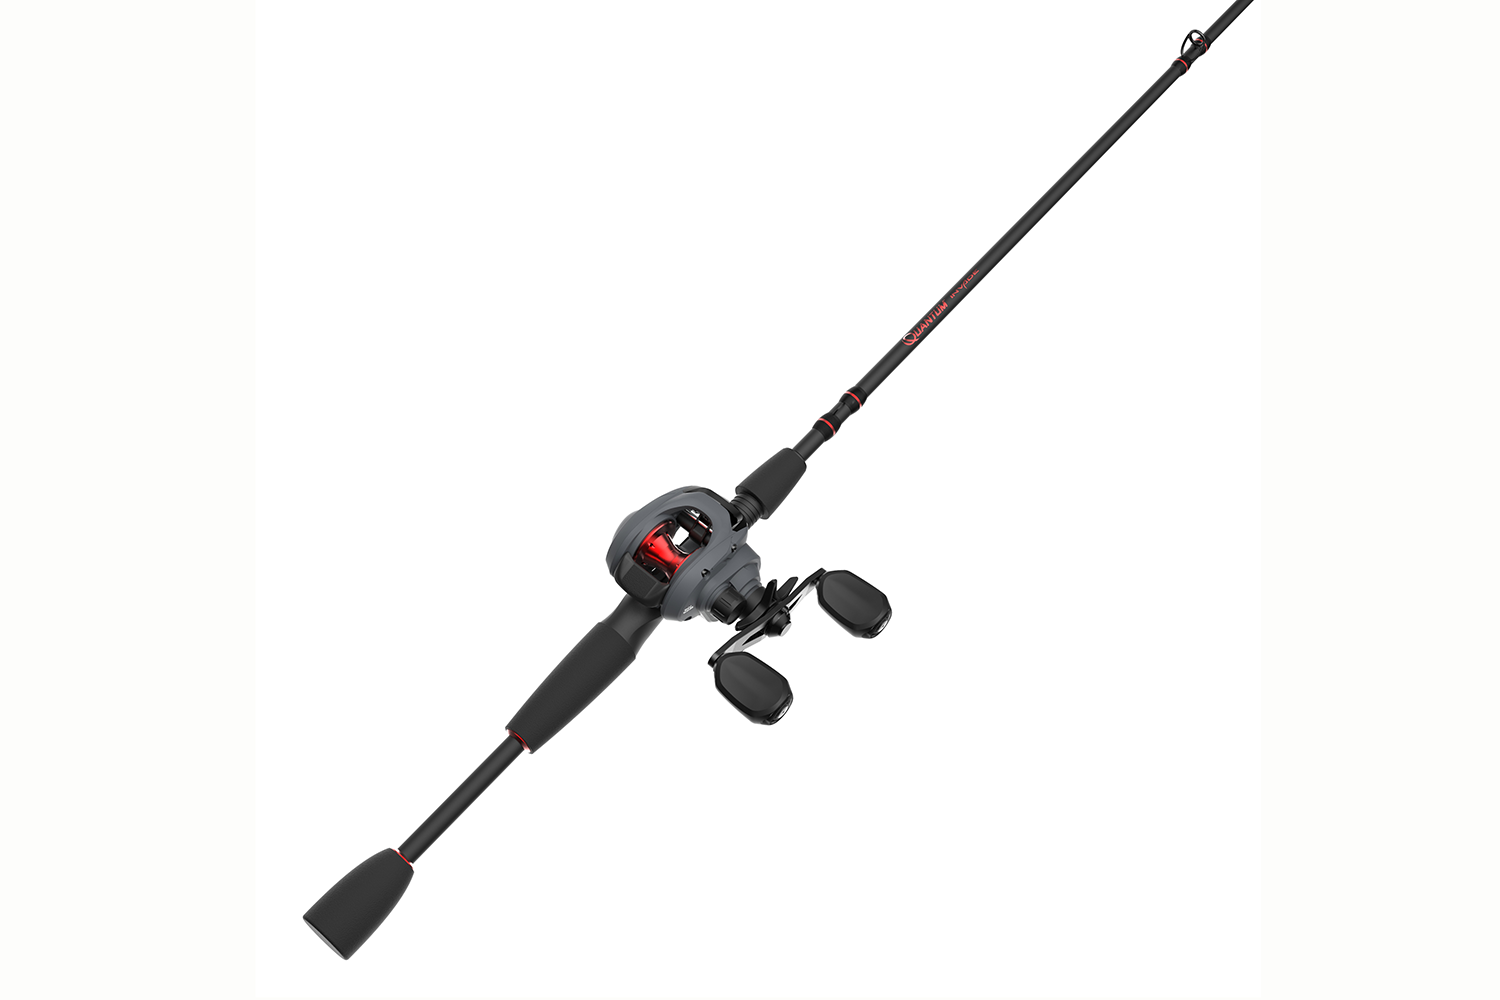 <p><b>Quantum Invade Combo</b></p>
<p>The tough, yet-smooth design and compact size of Invade baitcast makes it the perfect combo for anglers of any experience level. Complete with a 5-bearing system, continuous Anti-Reverse Clutch, Zero-Friction Pinion Design, and an IM6 graphite rod, this combo is the go-to choice of the real-world angler.</p>
<p><a href=